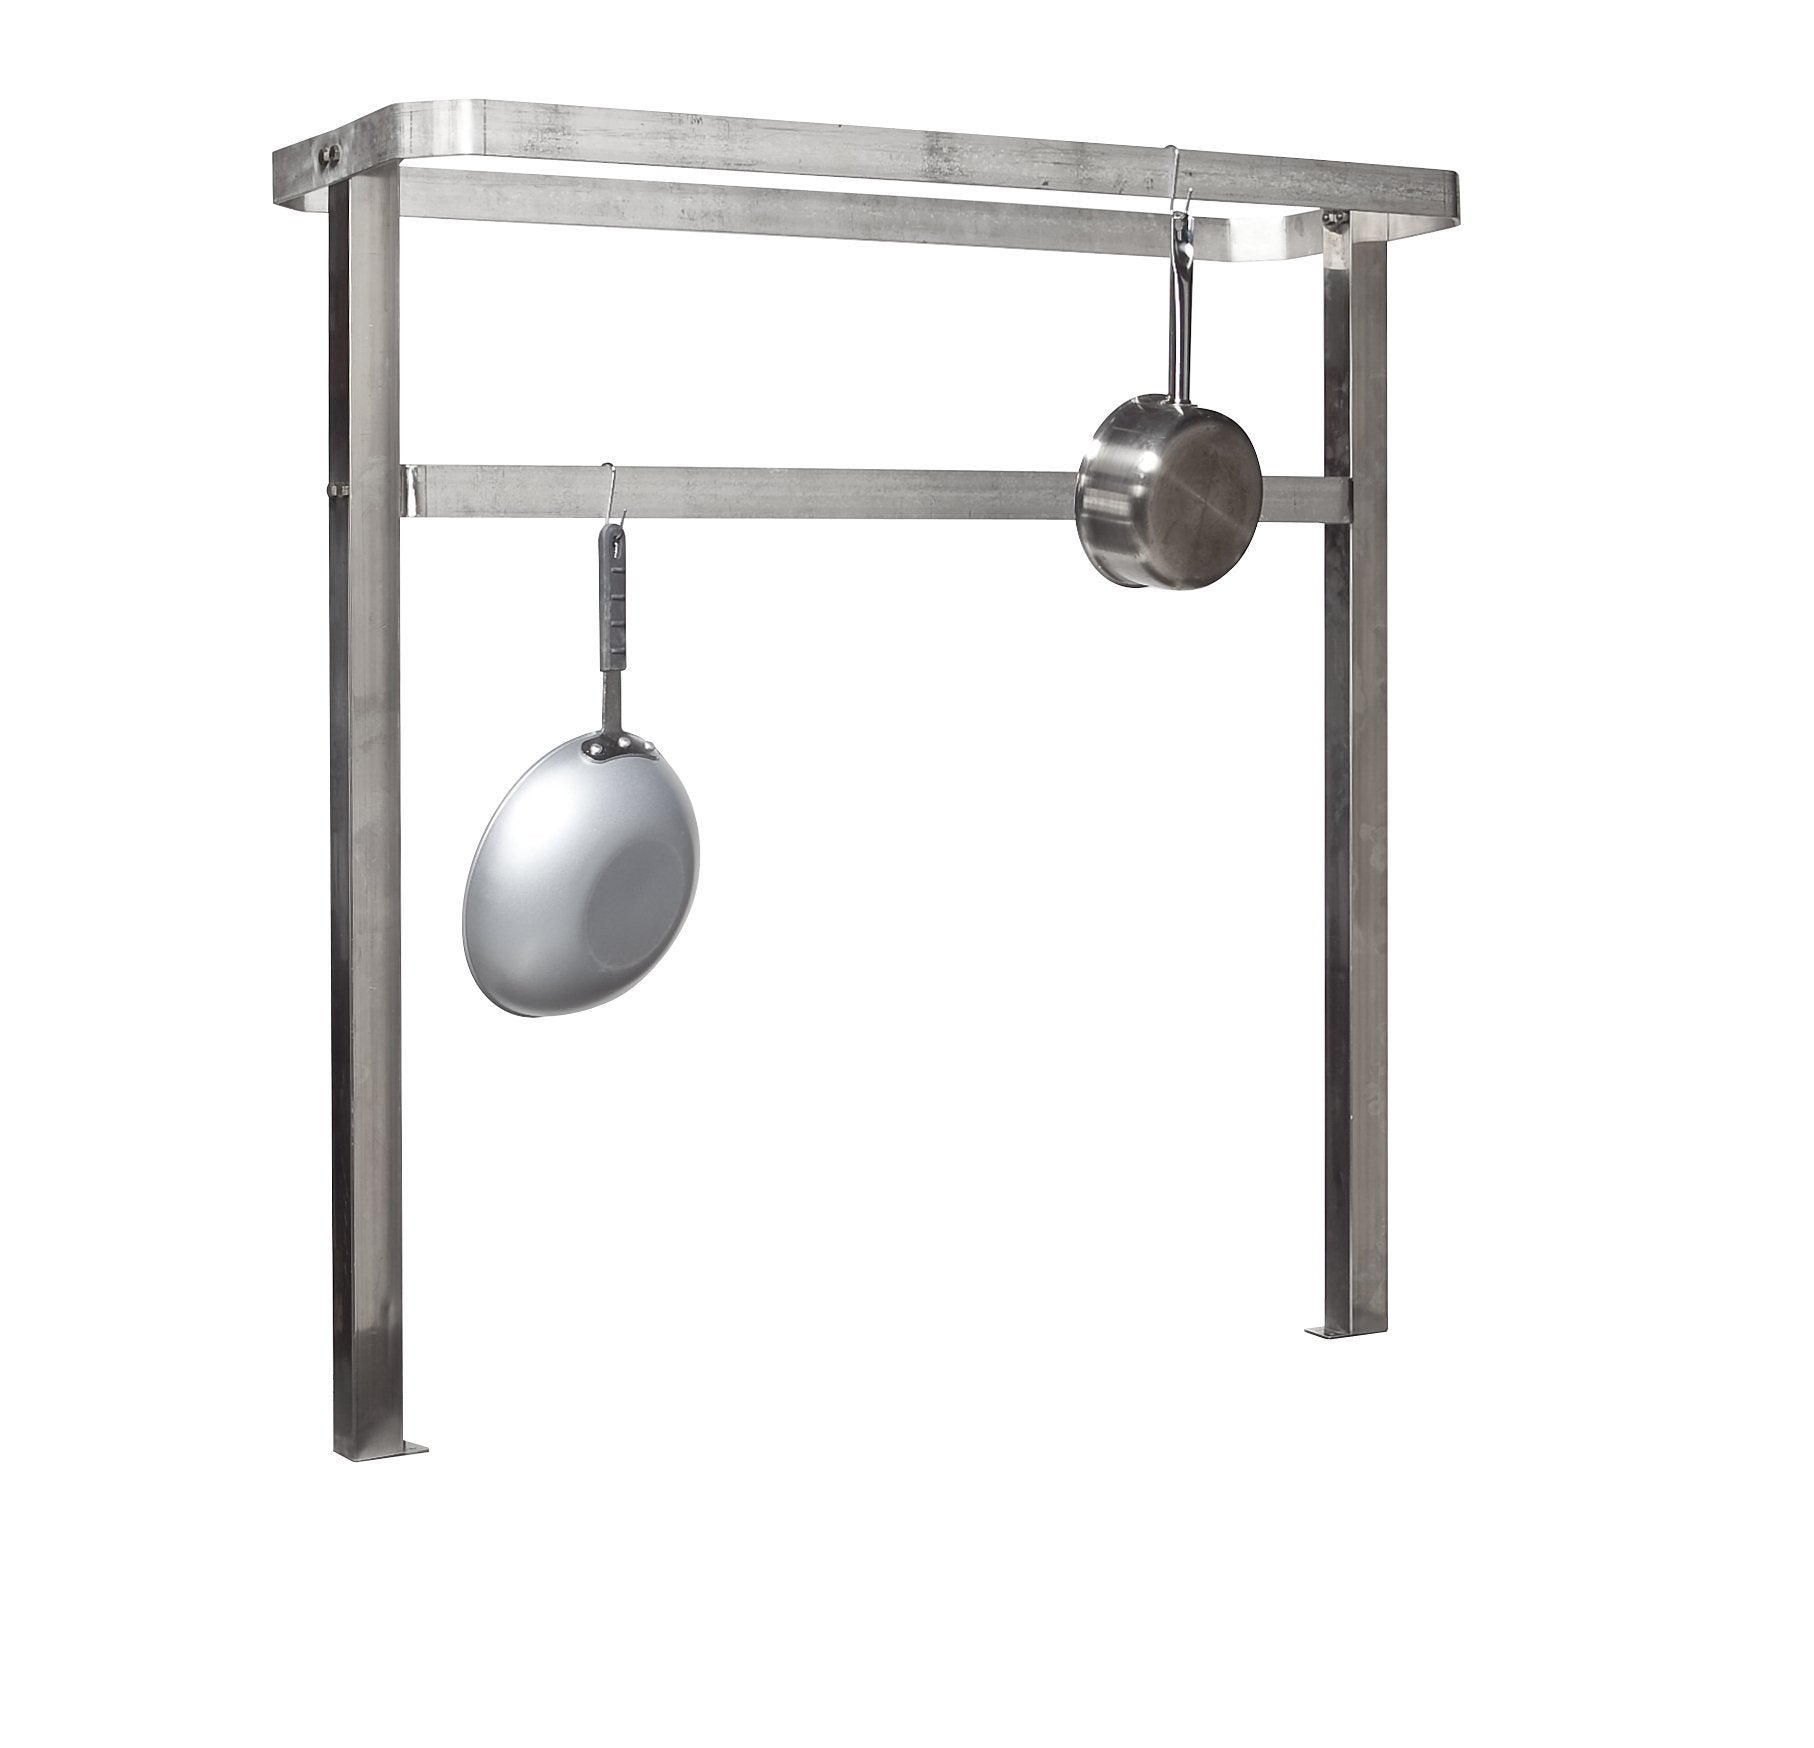 Exclusive tarrison tpr48 stainless steel table mount pot rack with 8 hooks 48 length x 48 height x 16 depth